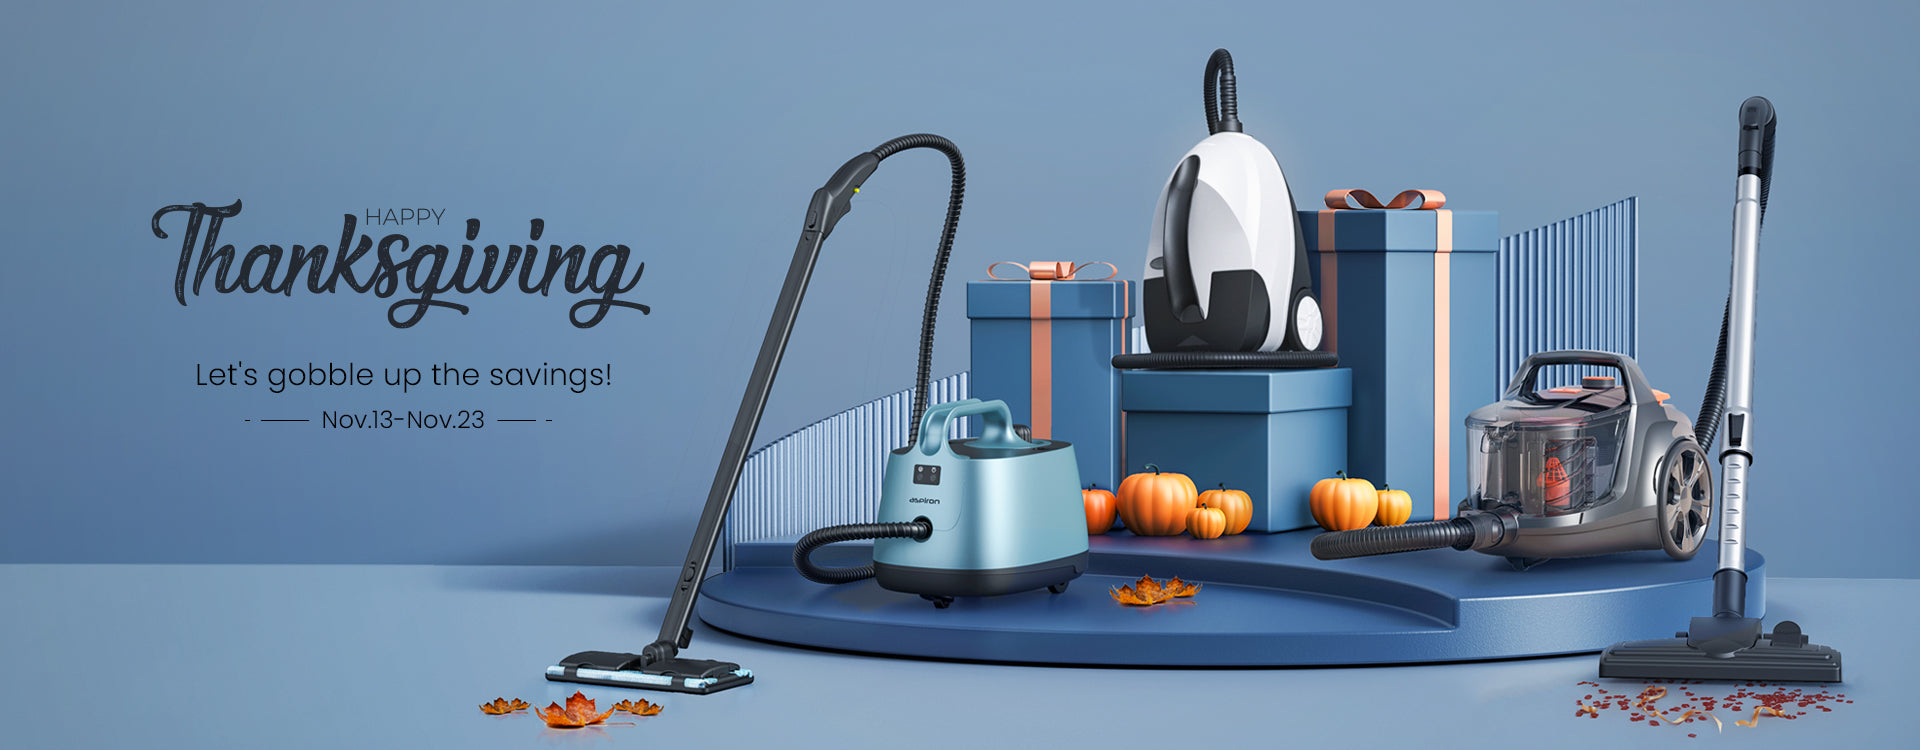 Before And After Thanksgiving Cleaning: Tackle Turkey Day Cleaning with an Aspiron® Vacuum Cleaner